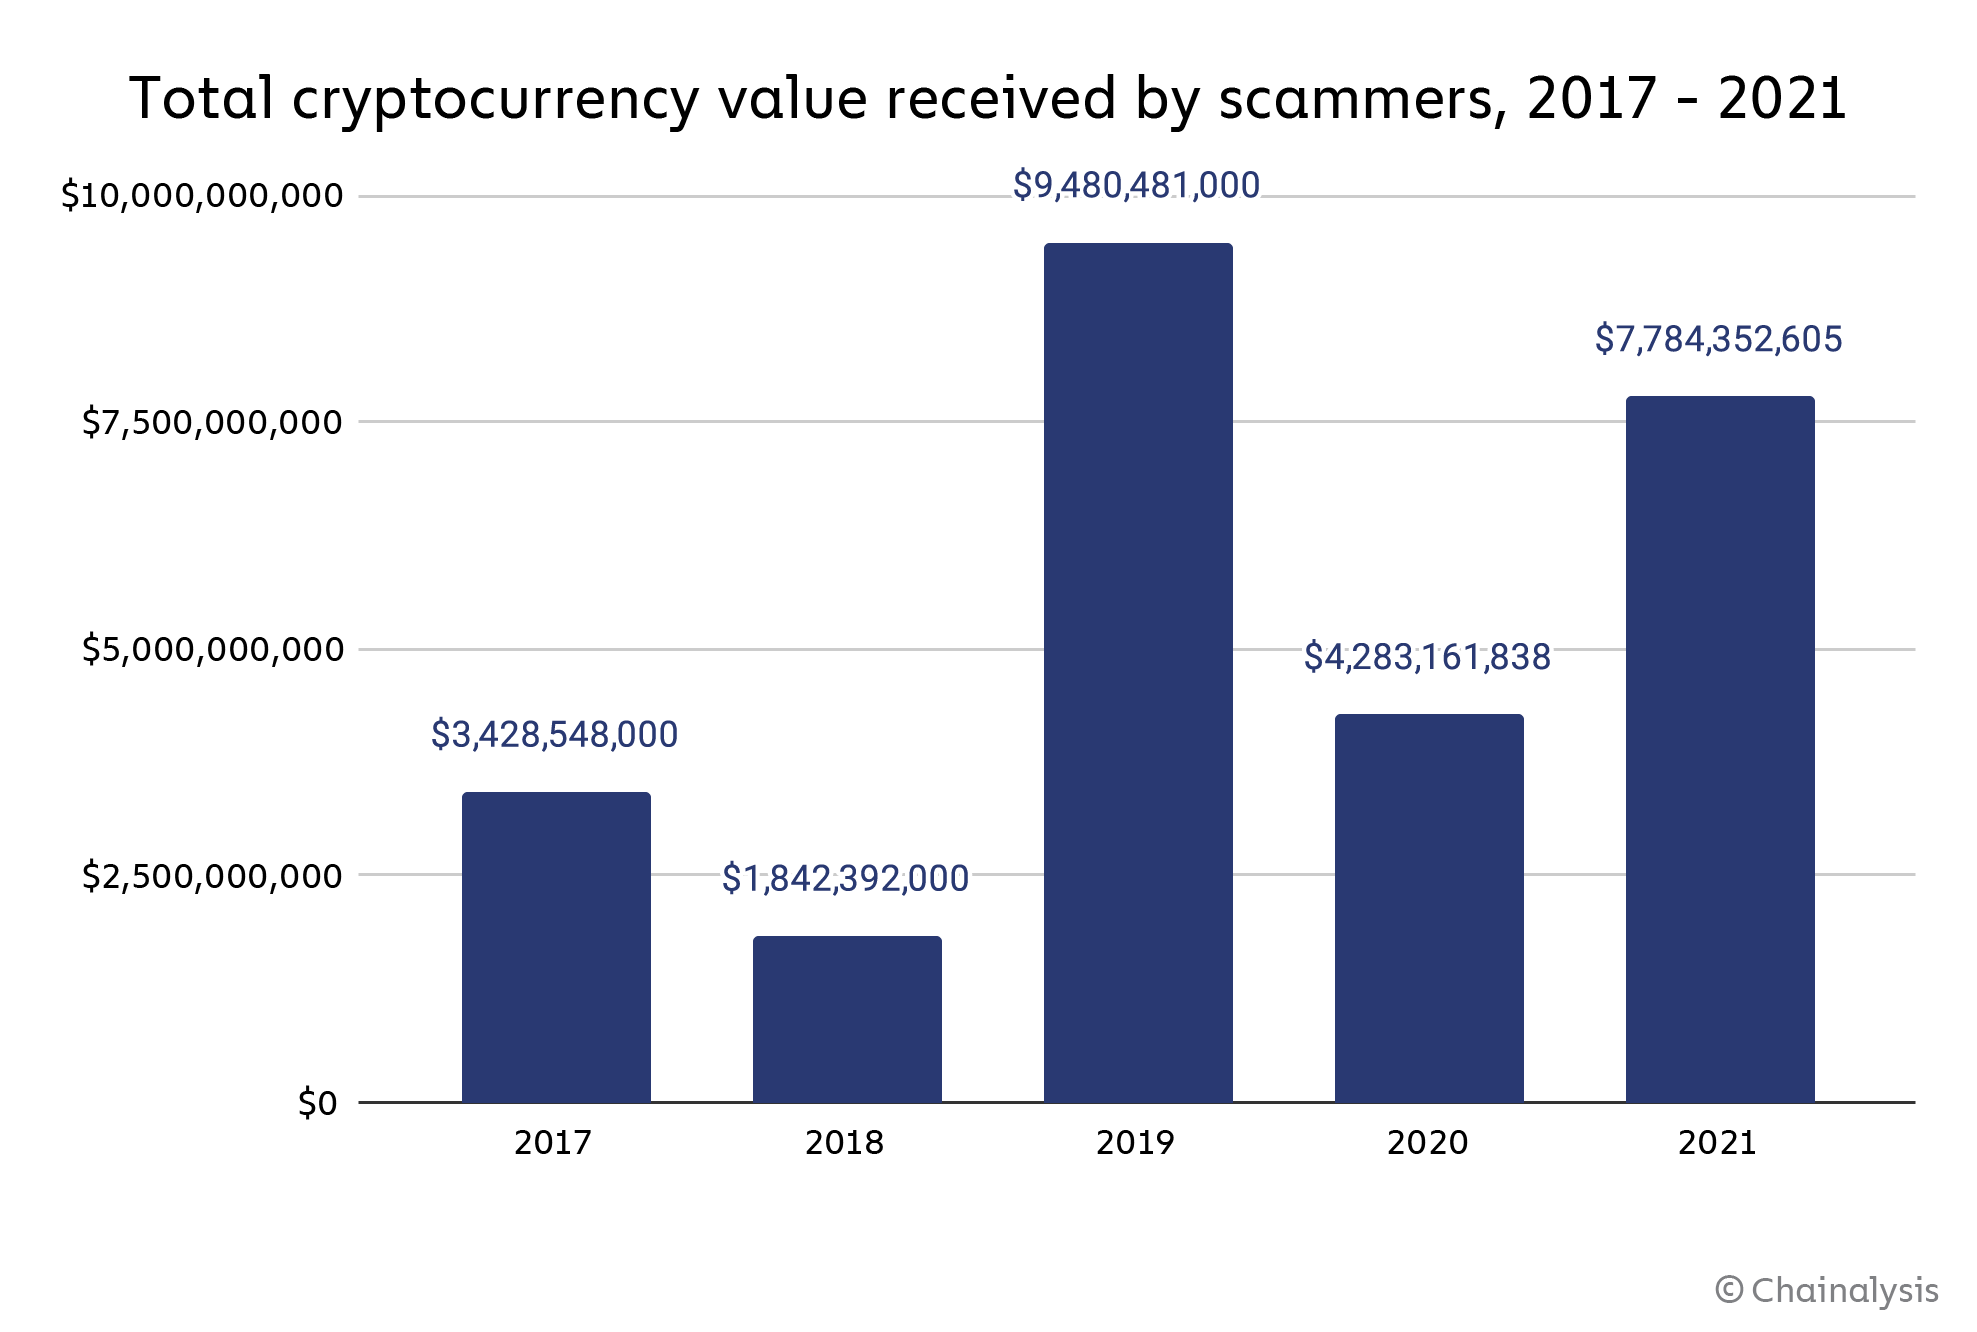 chart demonstrating the total cryptocurrency value received by scammers from 2017 through 2021.